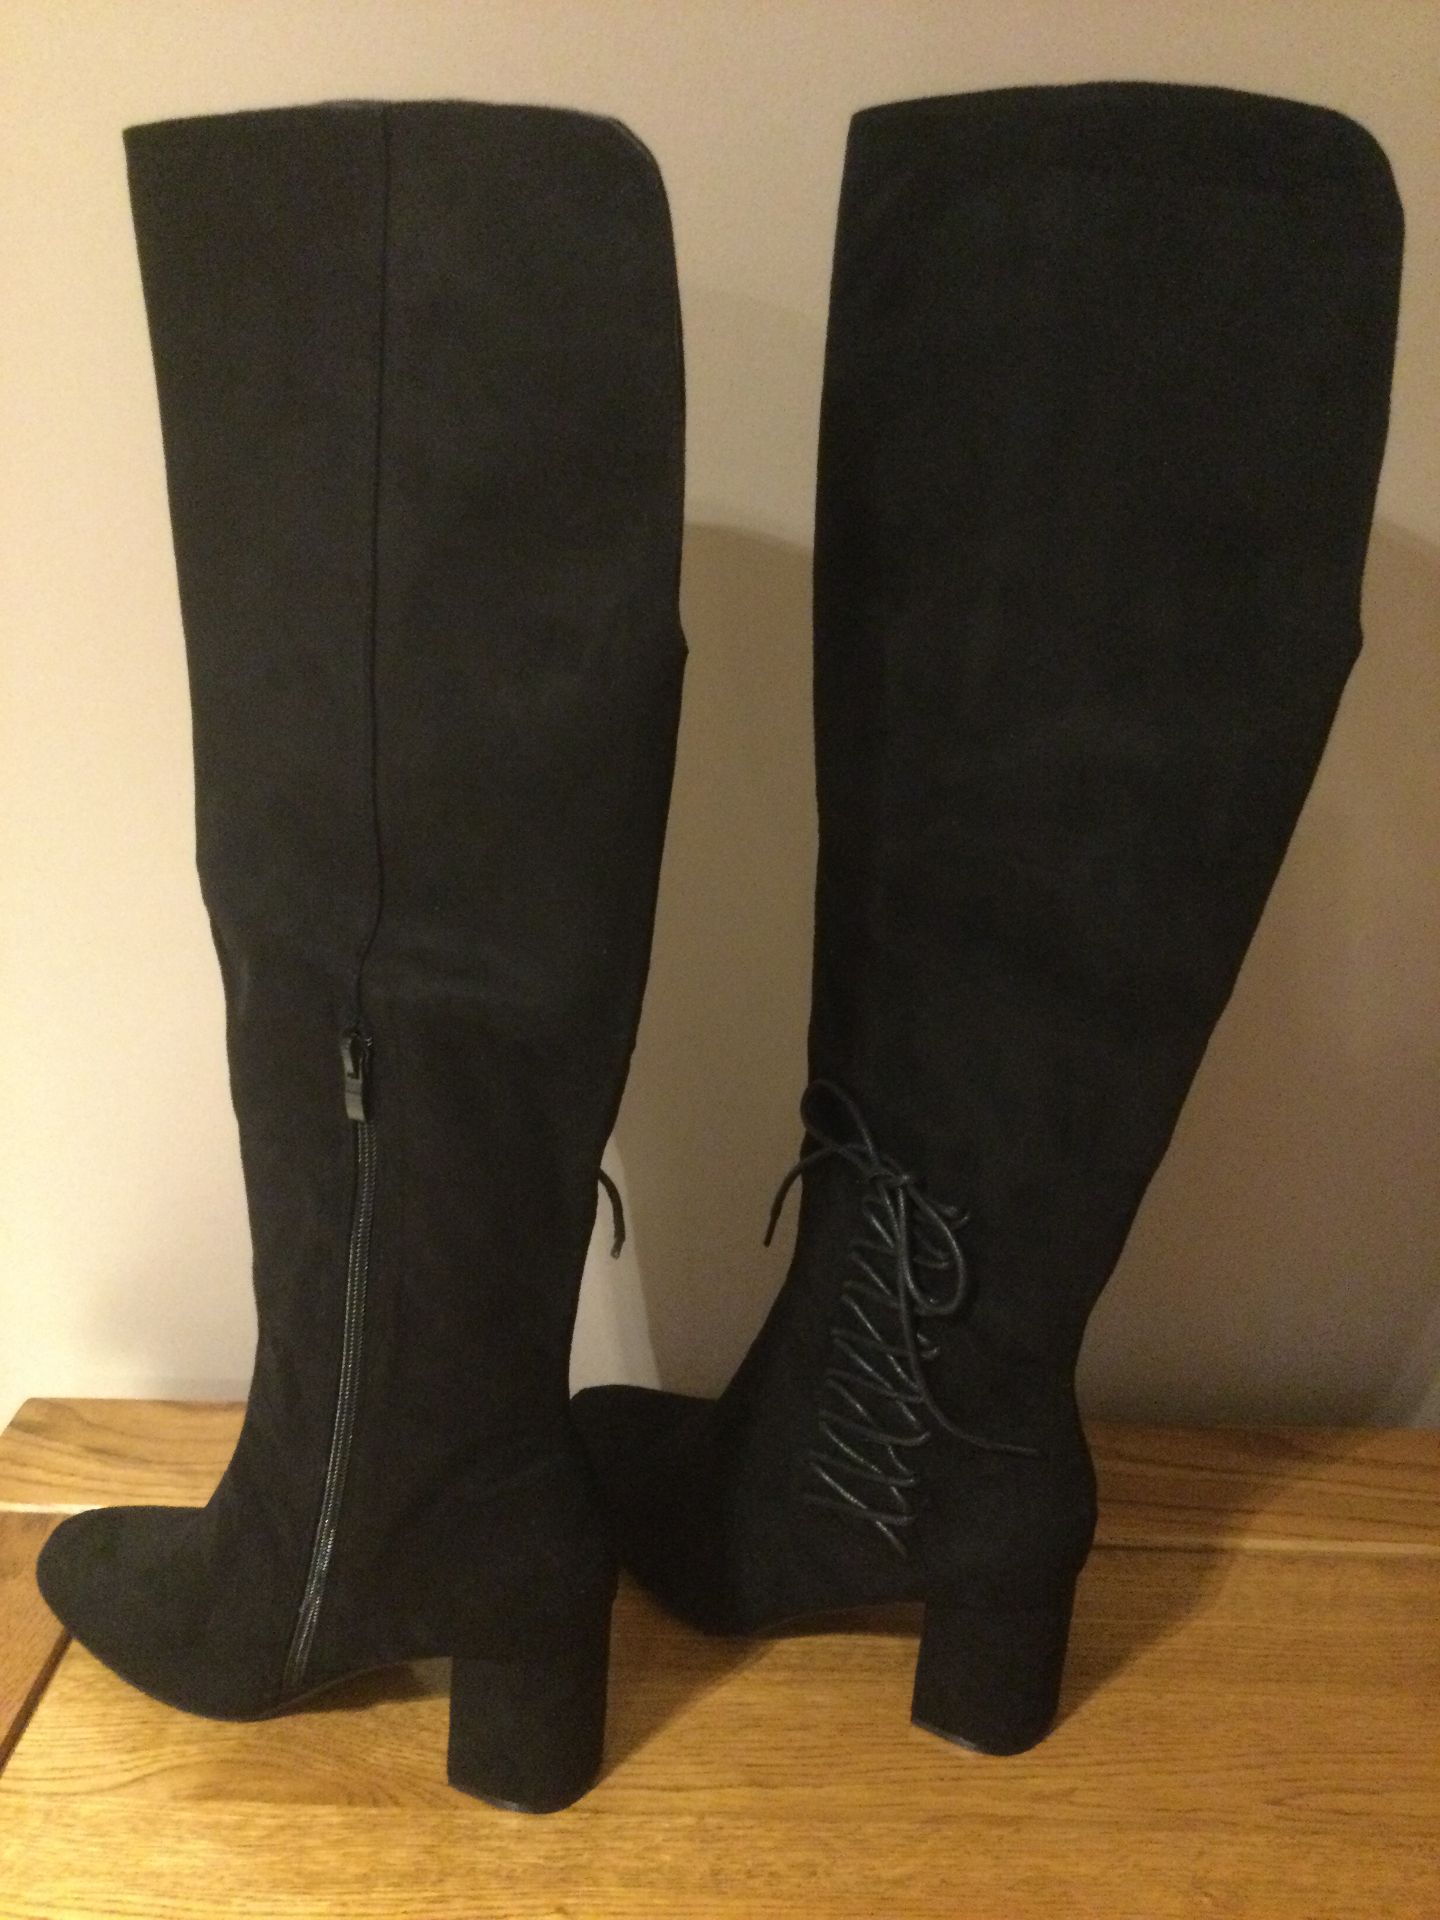 Dolcis “Emma” Long Boots, Block Heel, Size 5, Black - New RRP £55.00 - Image 3 of 7